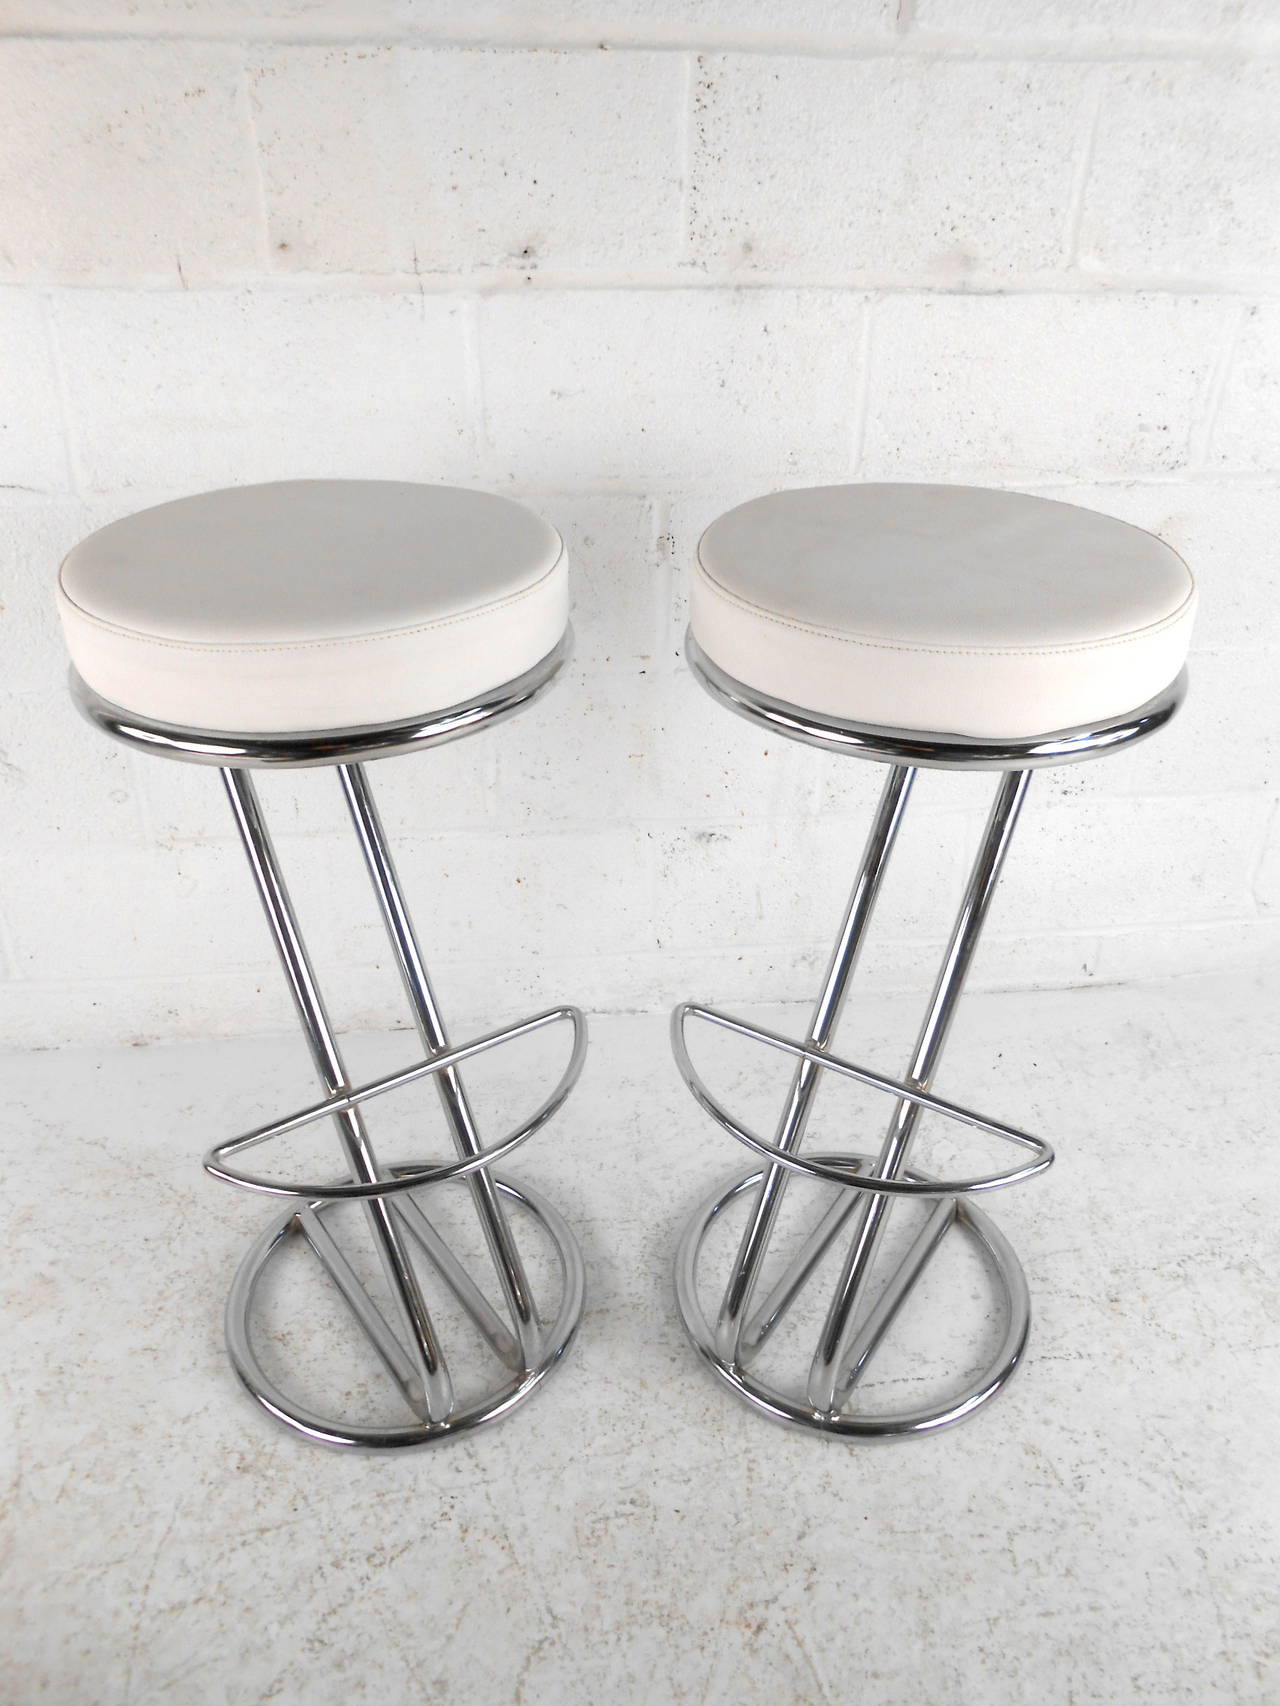 This pair of midcentury bar stools feature beautiful white vinyl upholstery and modern chrome bases which offer comfortable seating and a unique flare to any home or office space.  

Please confirm item location (NY or NJ) with dealer.